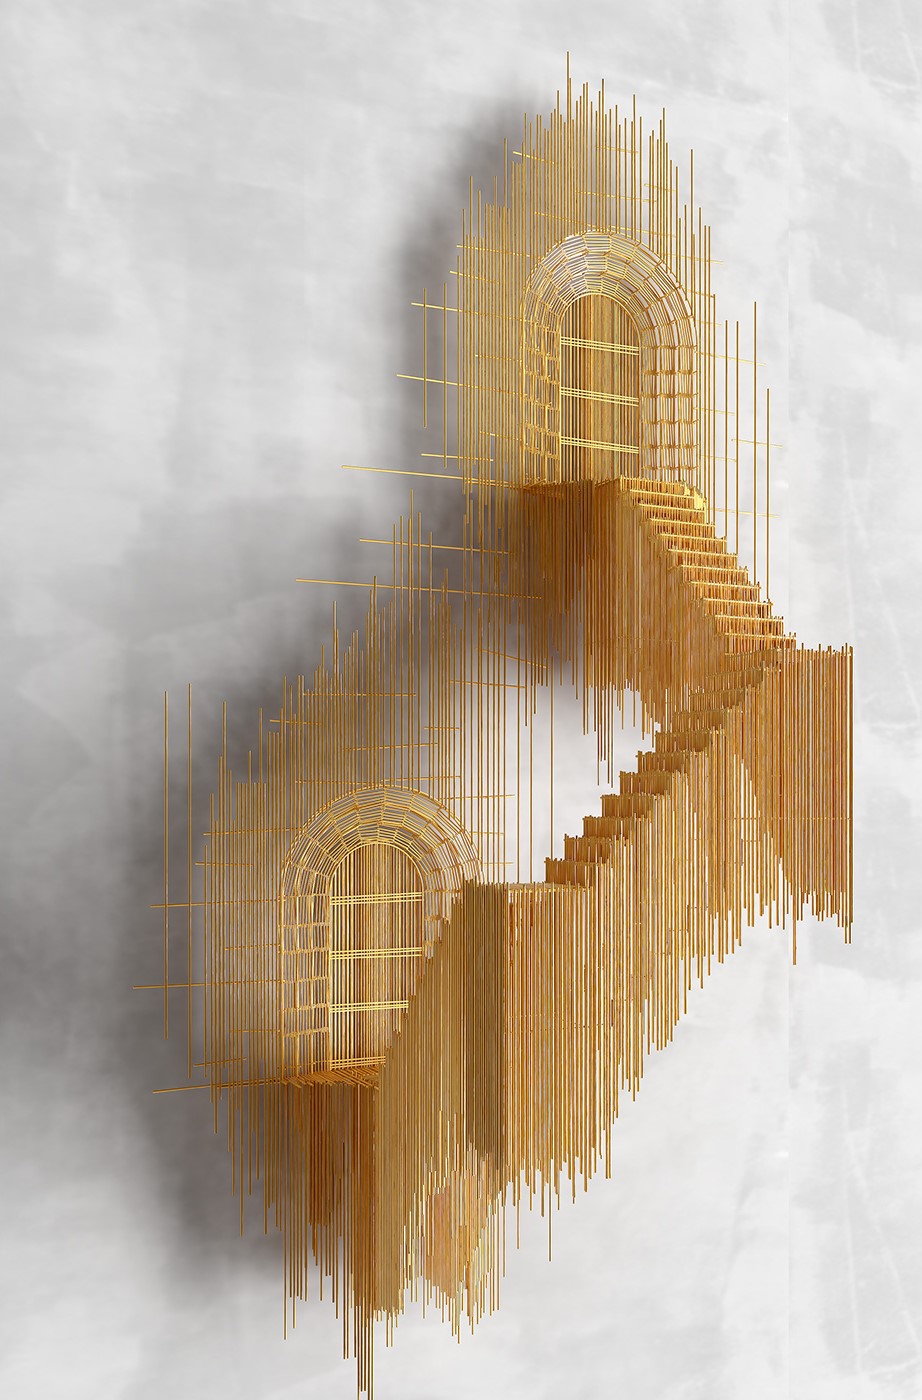 Metal Sketches Architectural Steel Wire Sculptures By David Moreno 18